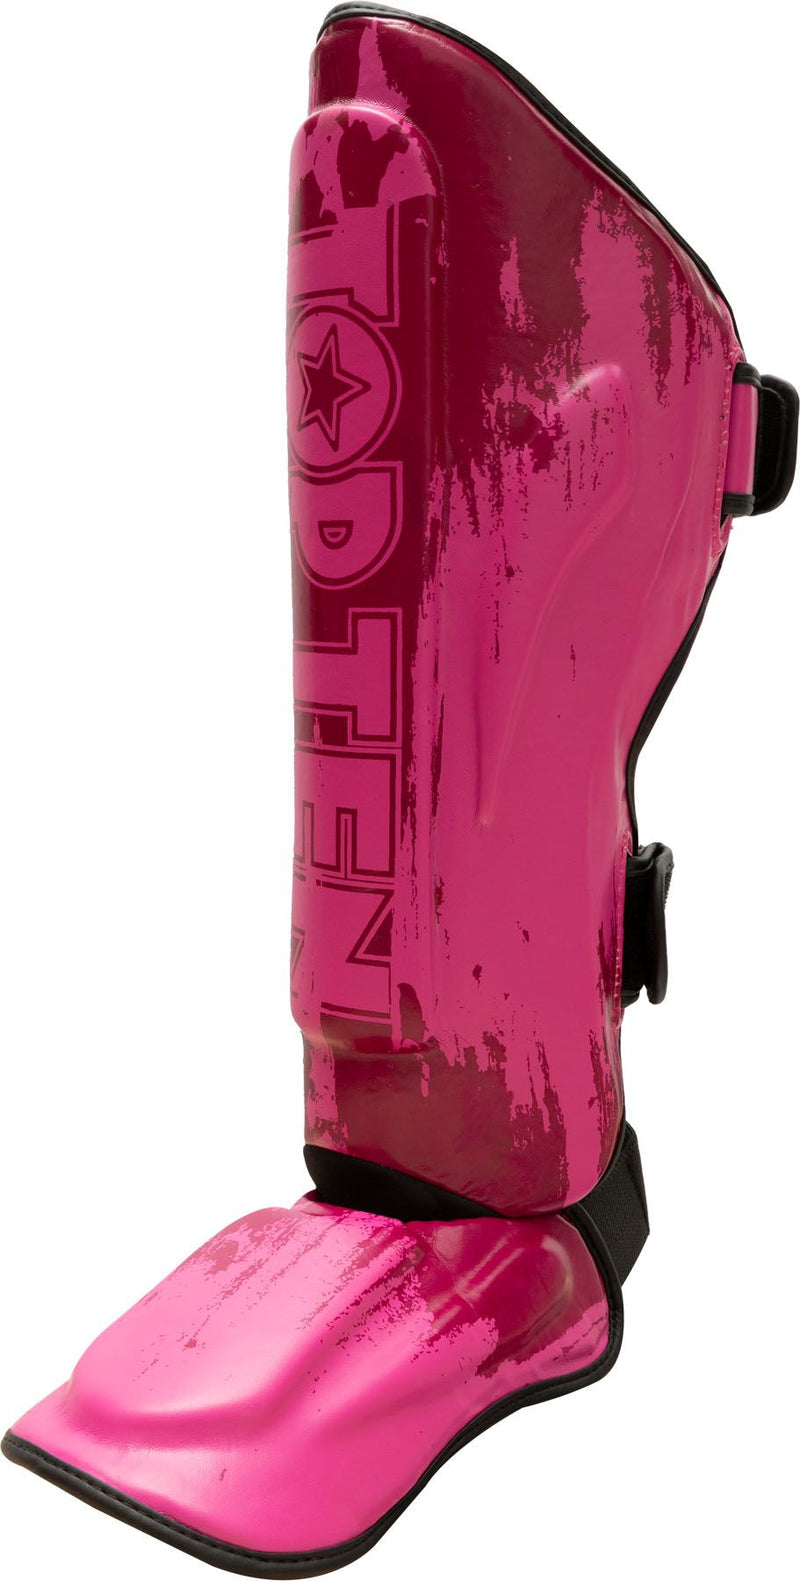 Top Ten Shin and Instep Guard “Power Ink” - pink